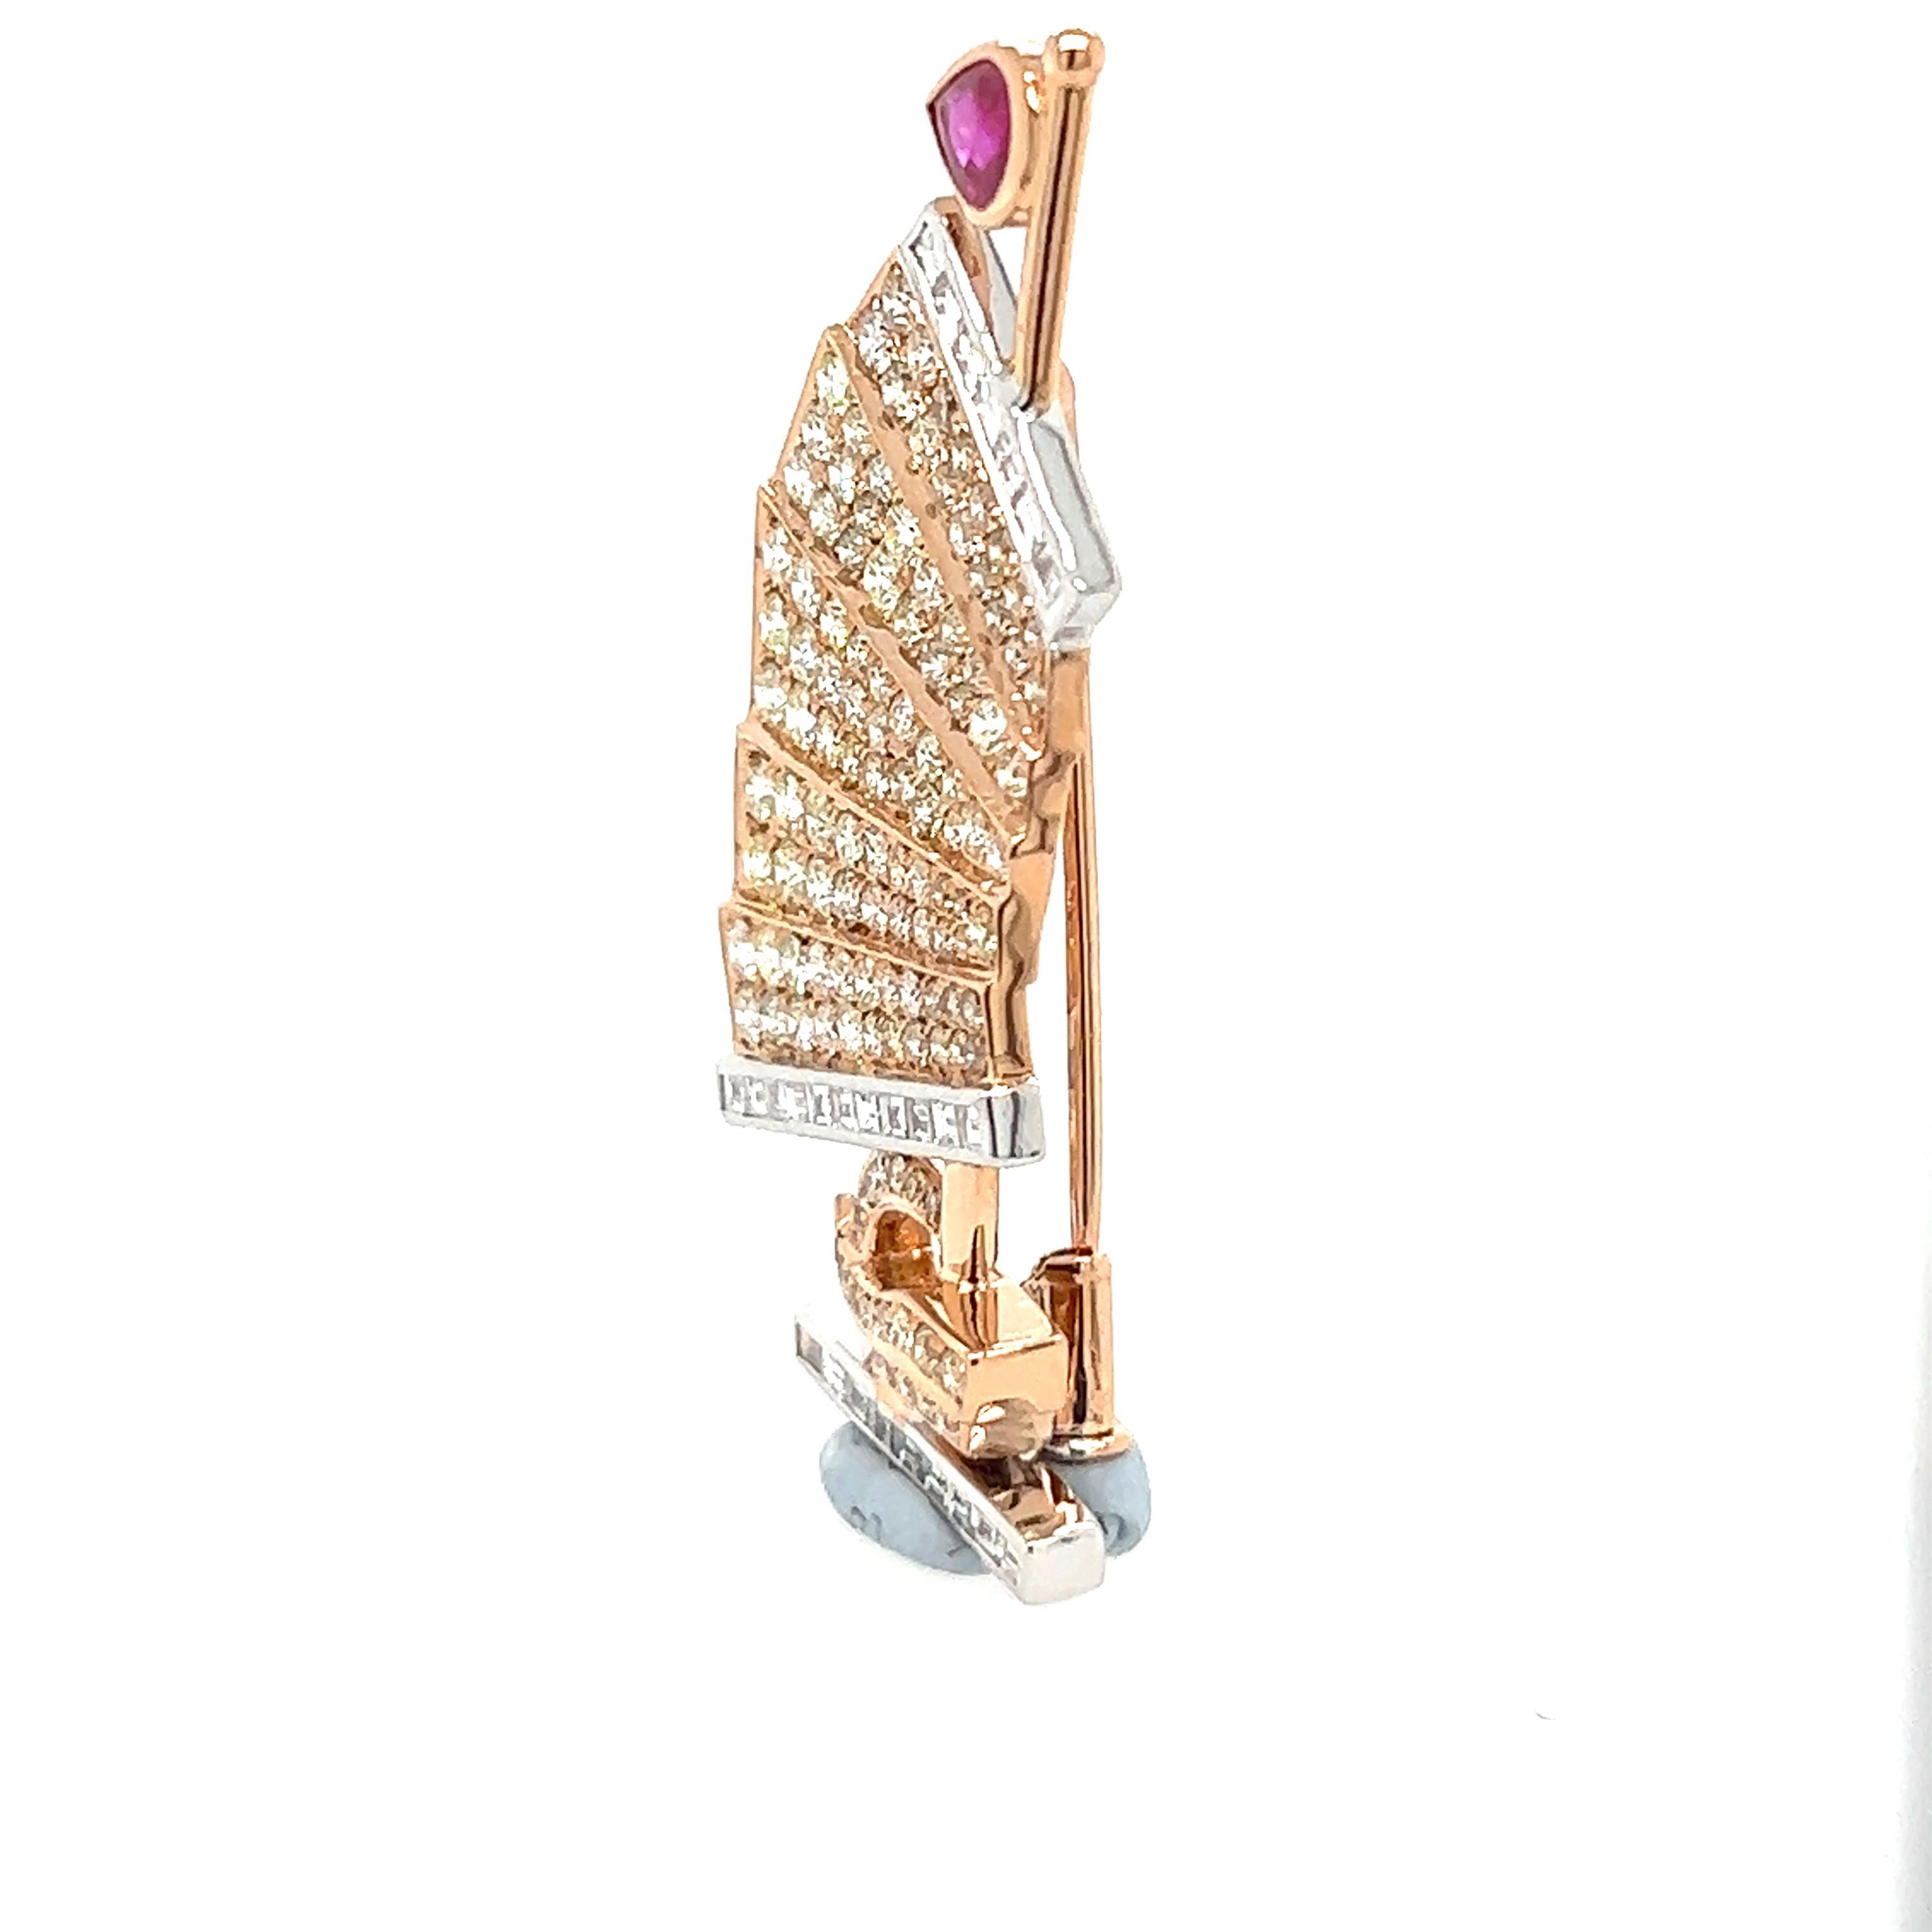 Brooch with Diamonds and Rubies
148 Diamonds -  3.13 CT
1 RUBY - 0.54 CT
18K ROSE GOLD - 9.82 GM 

These Lucky Charm Brooch is One of the Kind and Very Special. Its Handcrafted from 18k Rose Gold  and has Natural Powers of Good Luck and Protection.